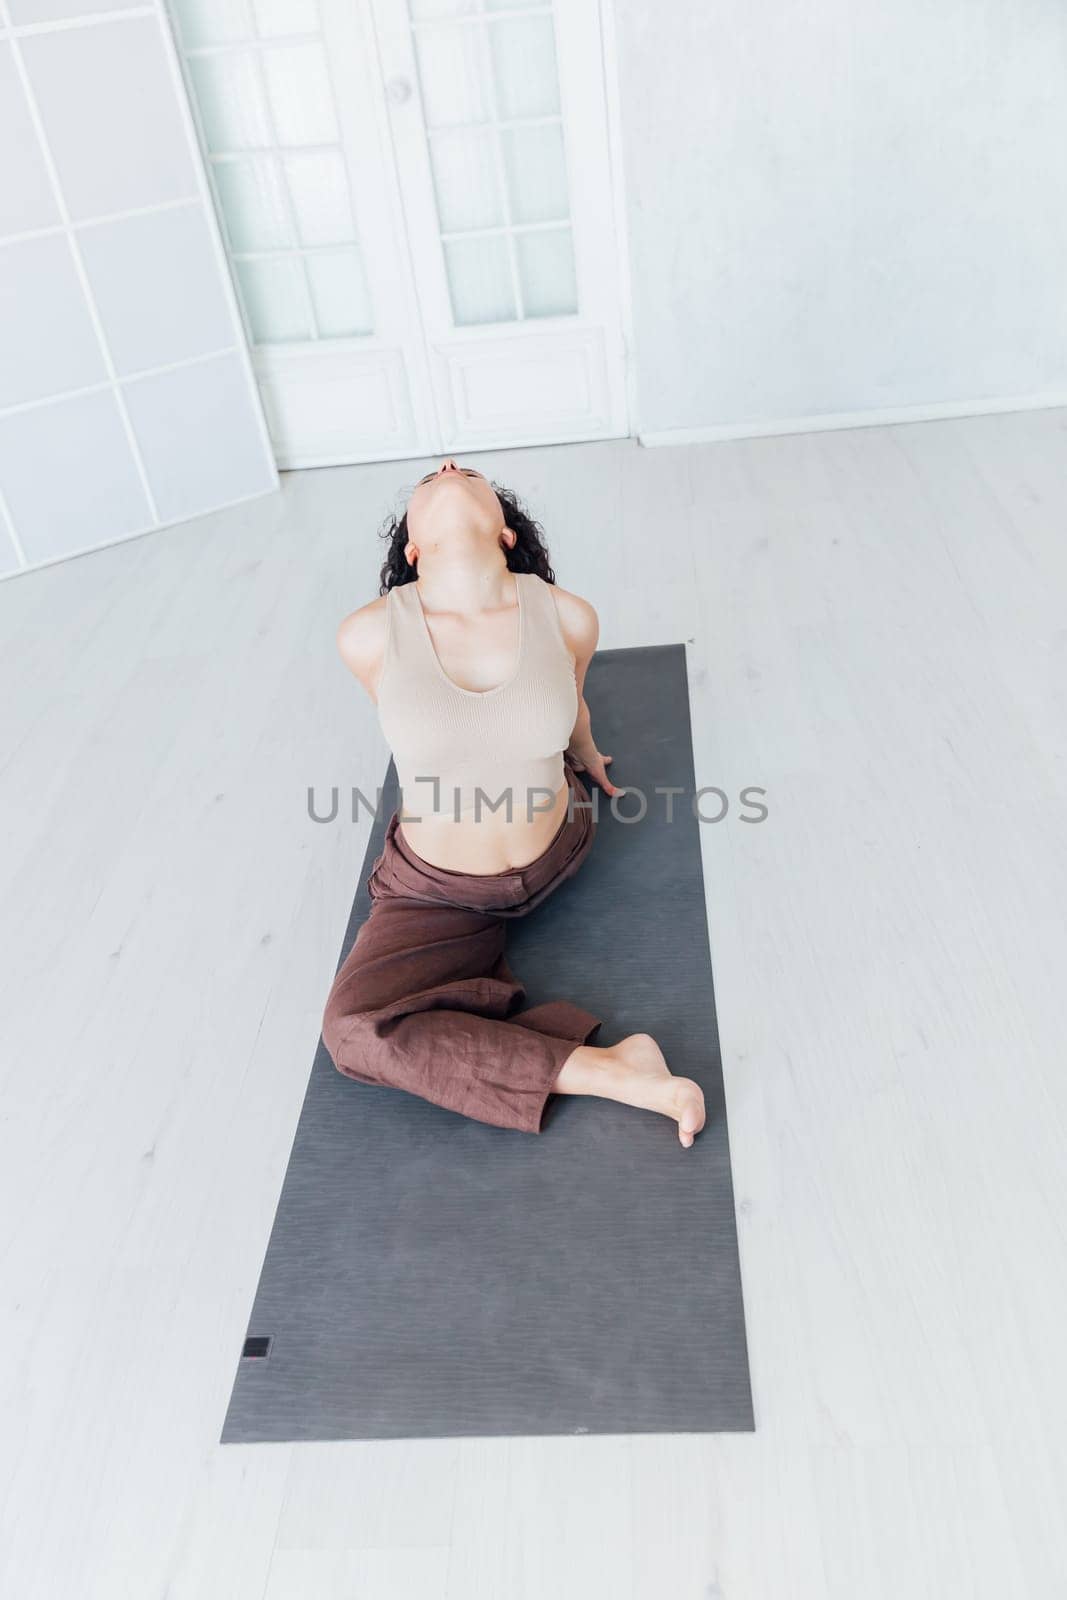 Stay at home fitness. Strong mature woman doing half bridge yoga pose, strengthening her abs muscles indoors, by Simakov